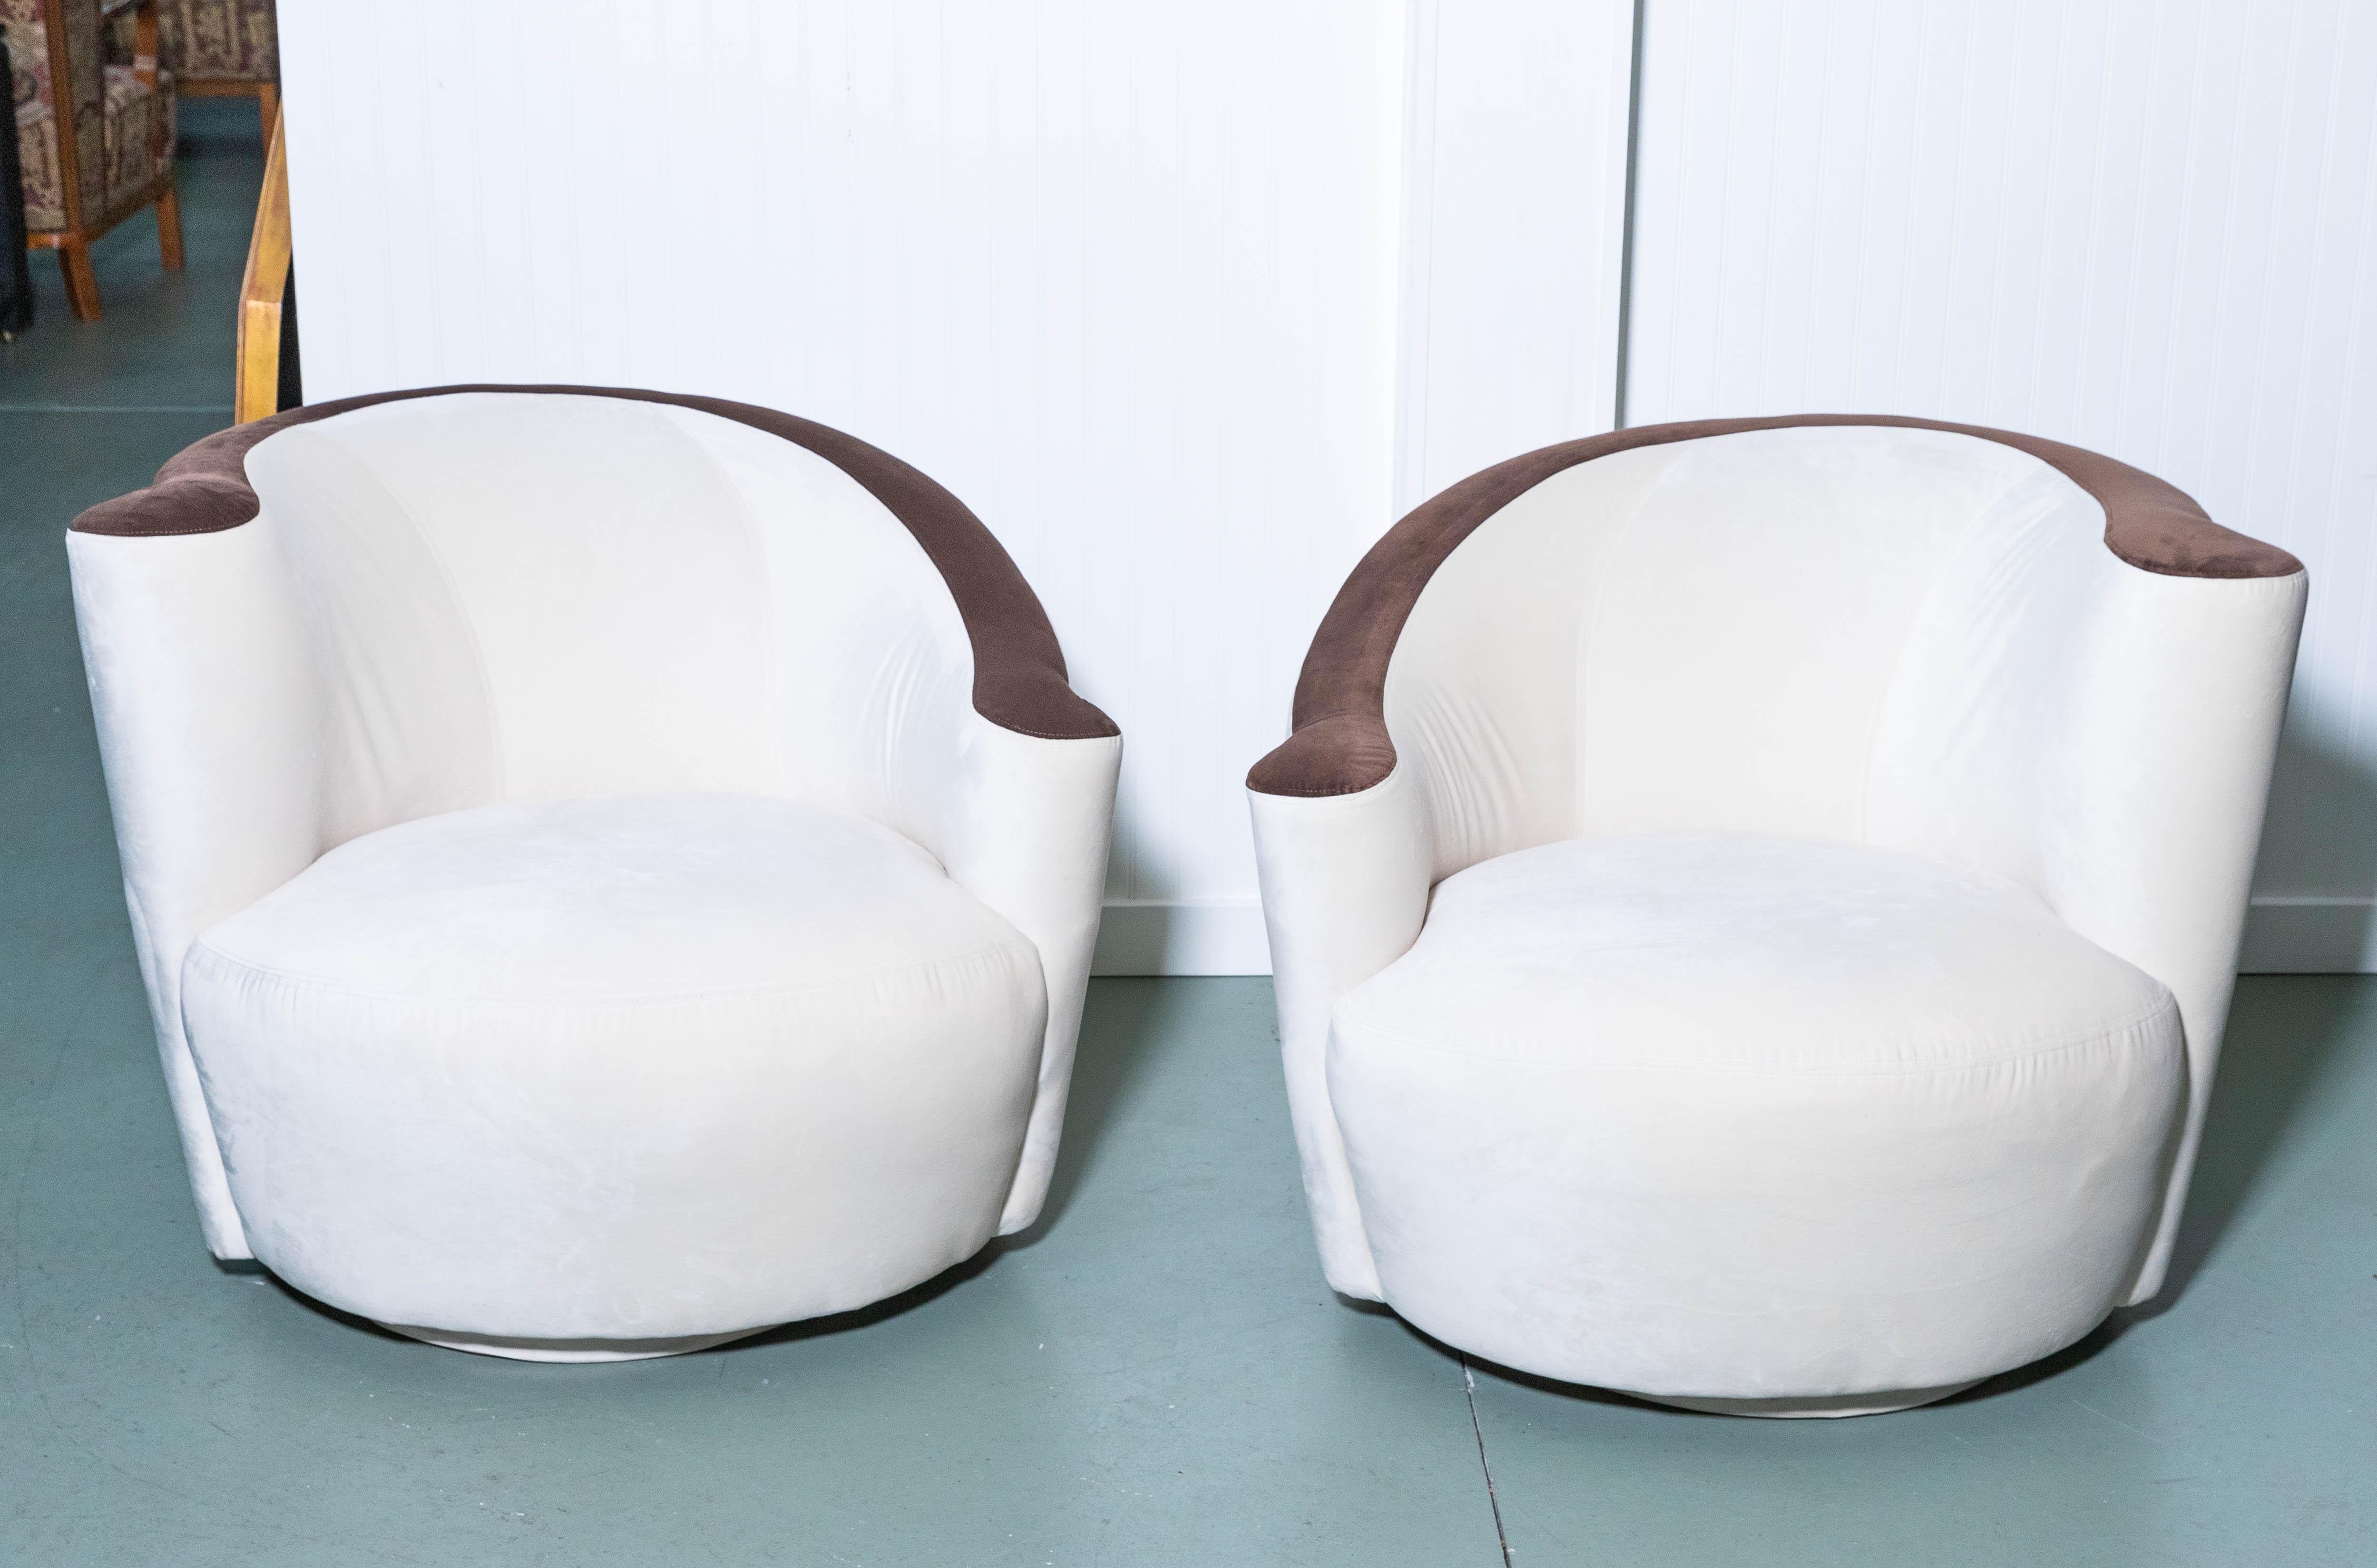 Pair of Vladimir Kagan Nautilus swivel chairs, newly upholstered in cream and chocolate ultrasuede for Weiman. LUX with curved top sides and seat. True deco style.